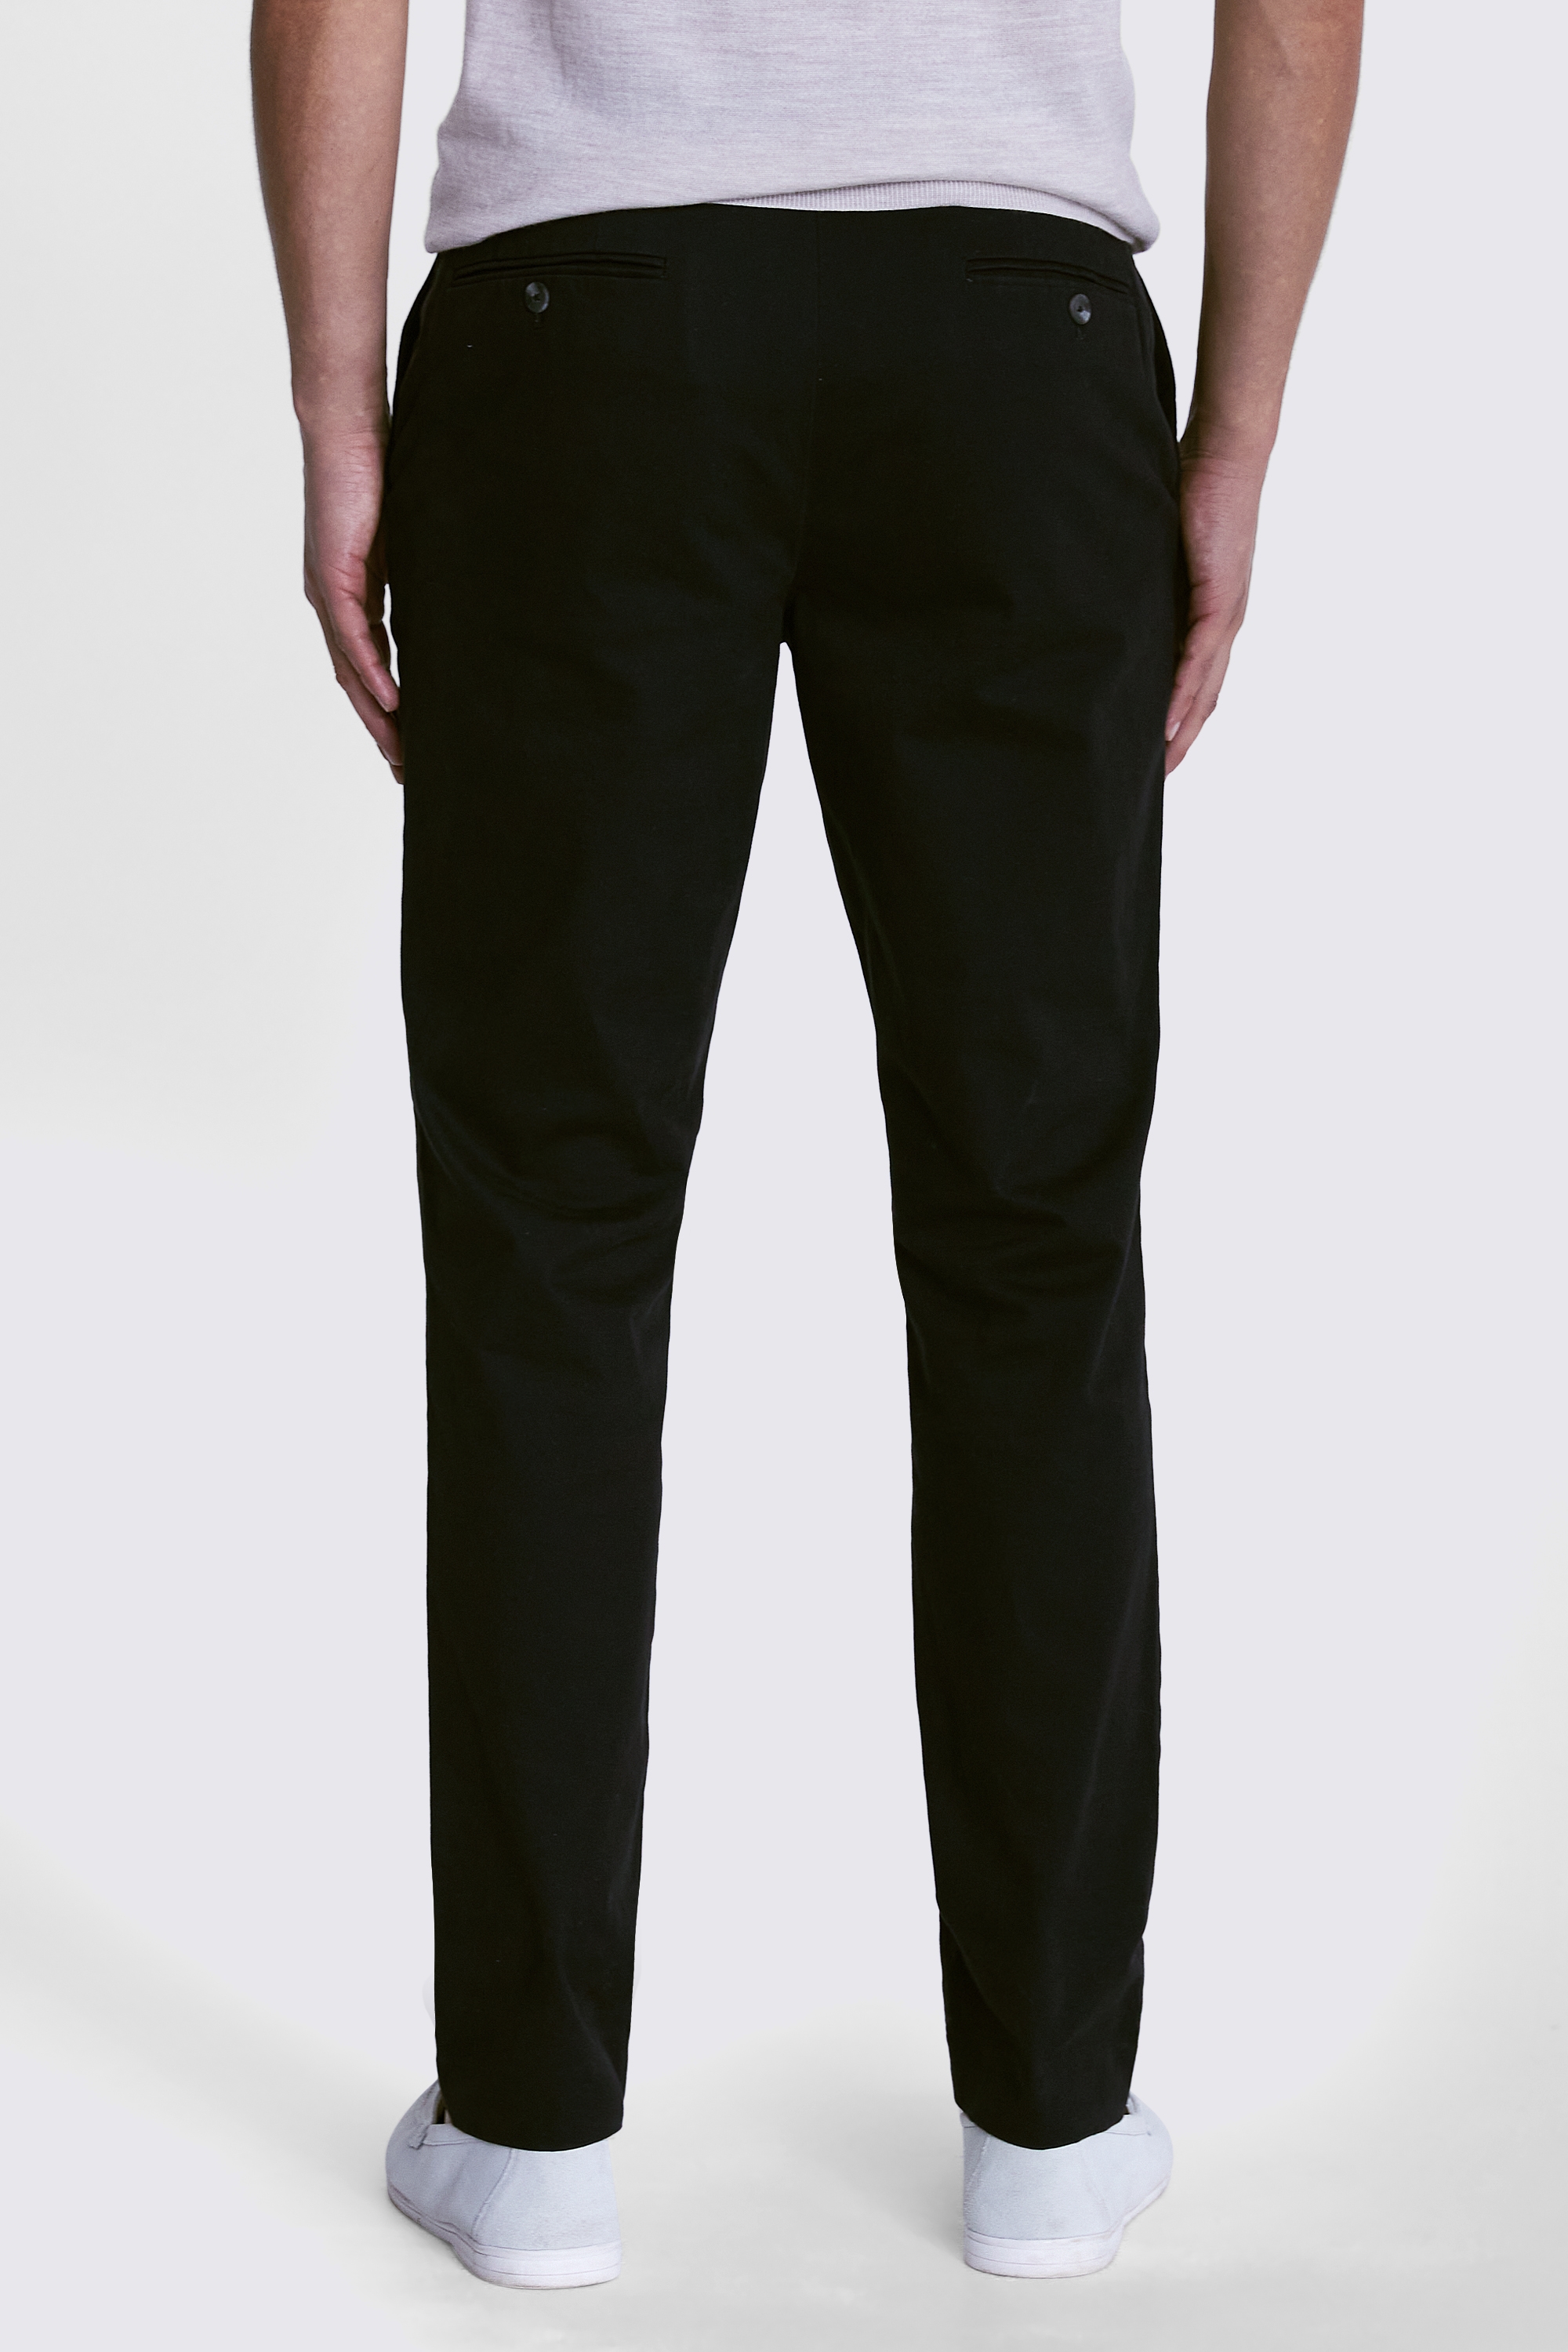 Slim Fit Black Stretch Chinos | Buy Online at Moss